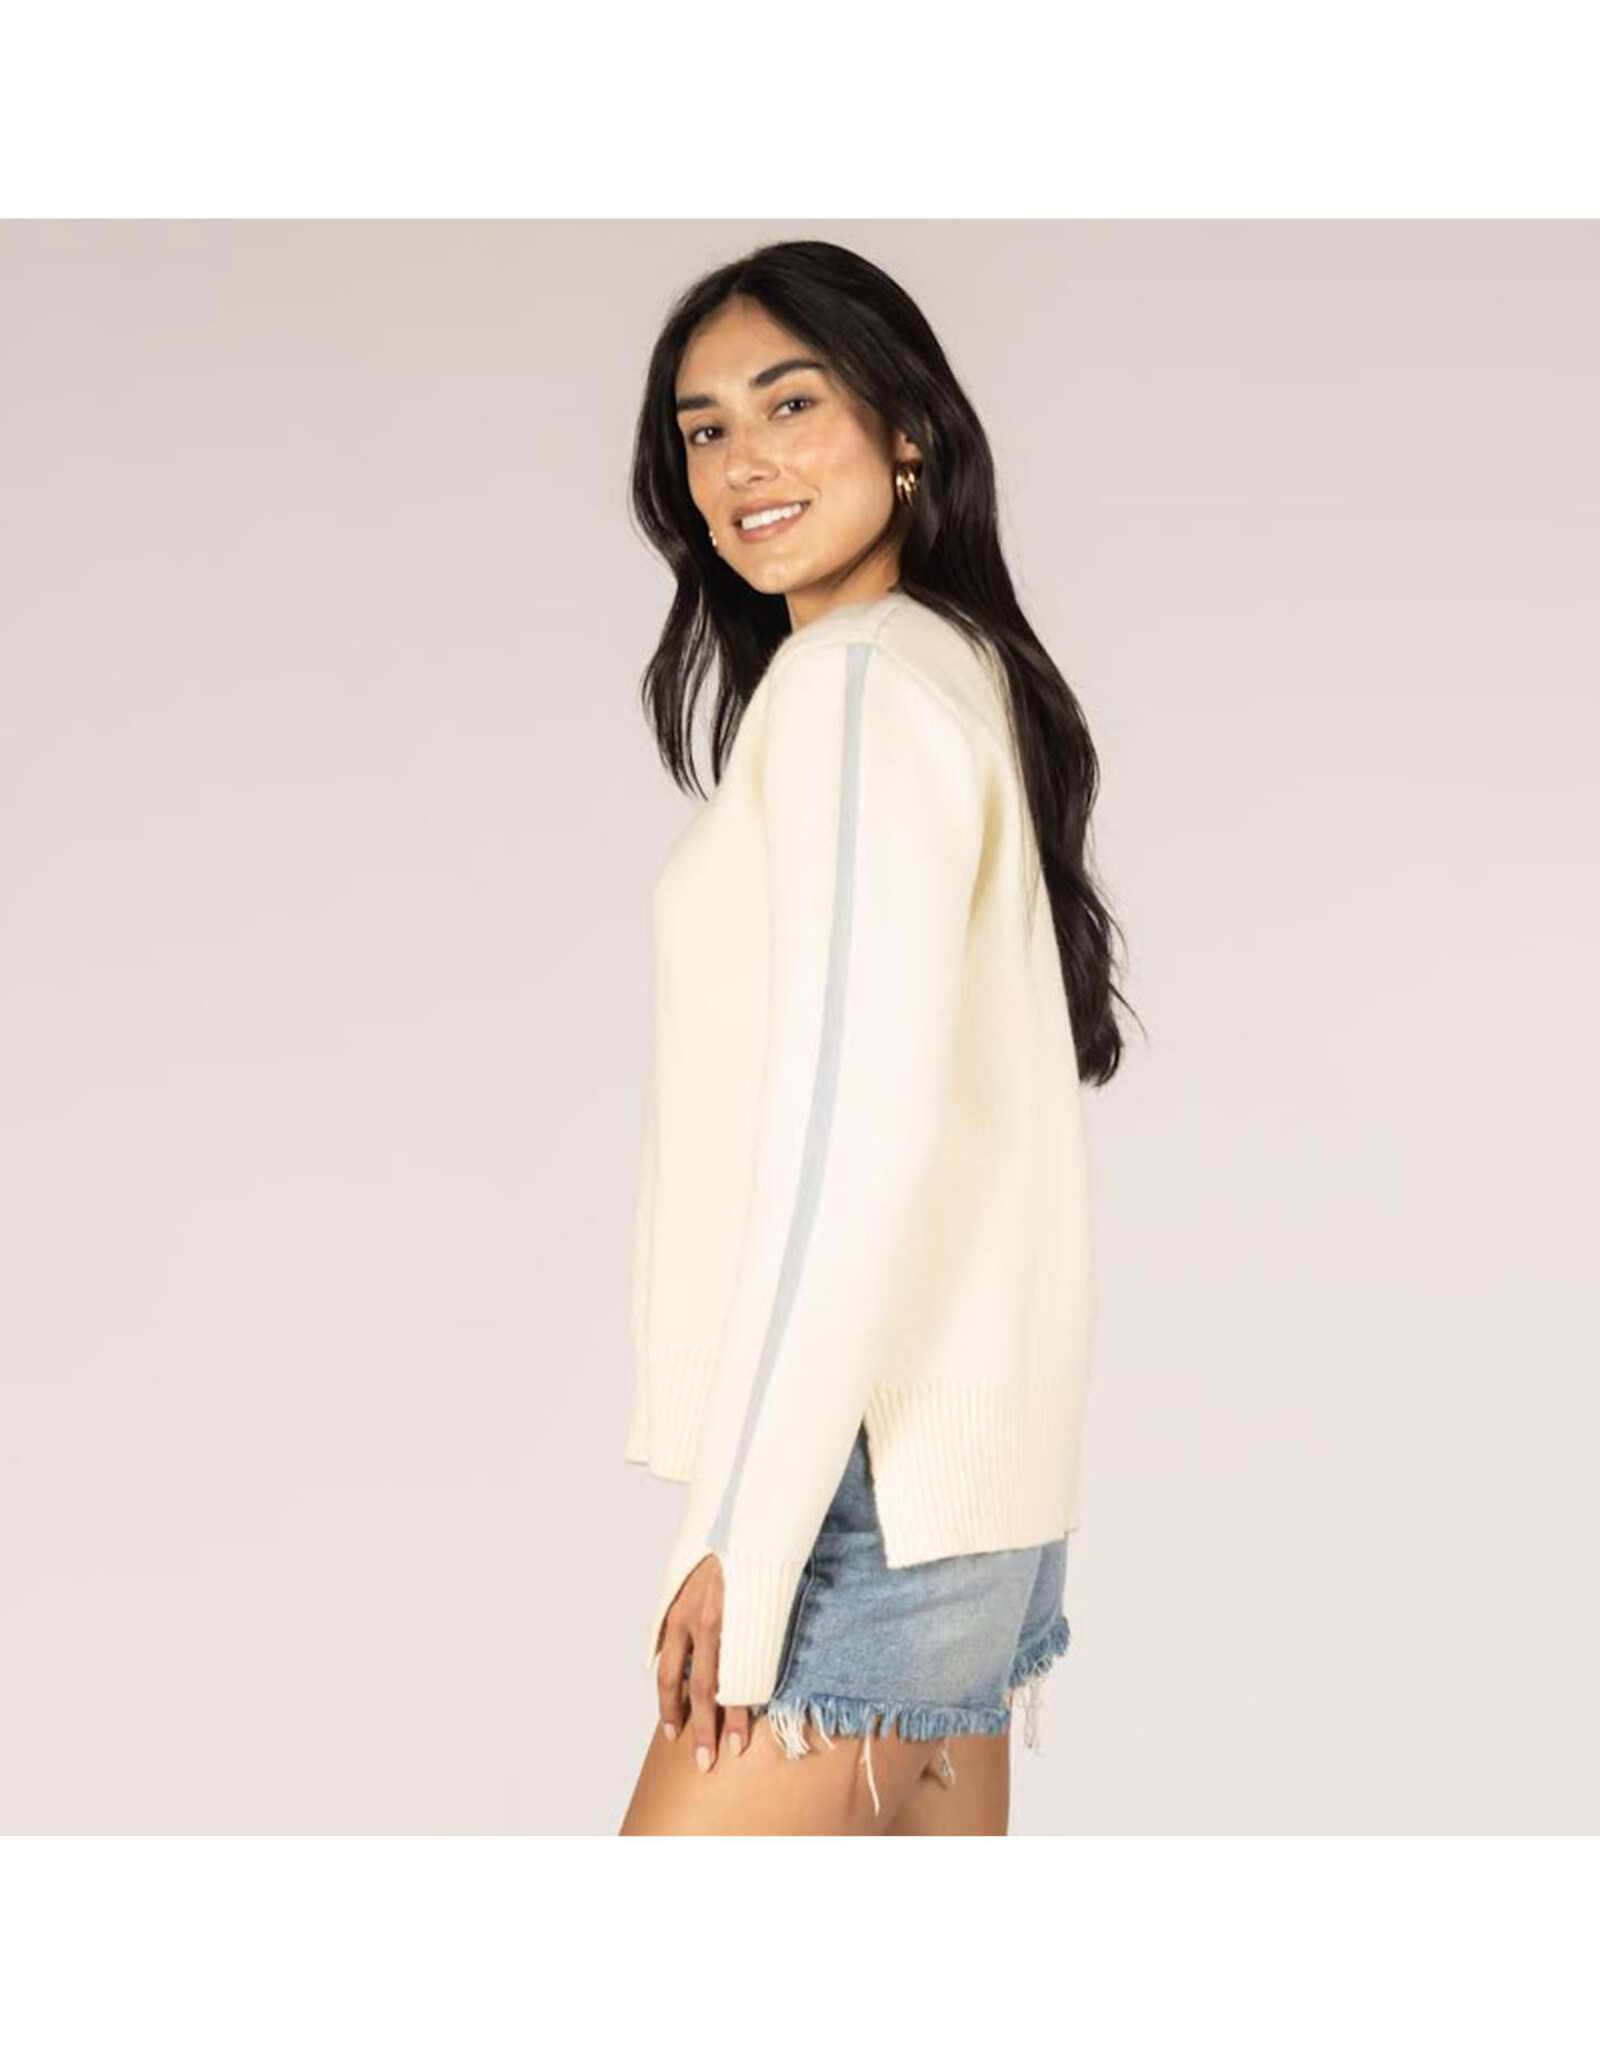 Before You Collection Knit V-Neck Contrast Sweater (Cream/Sky Blue)